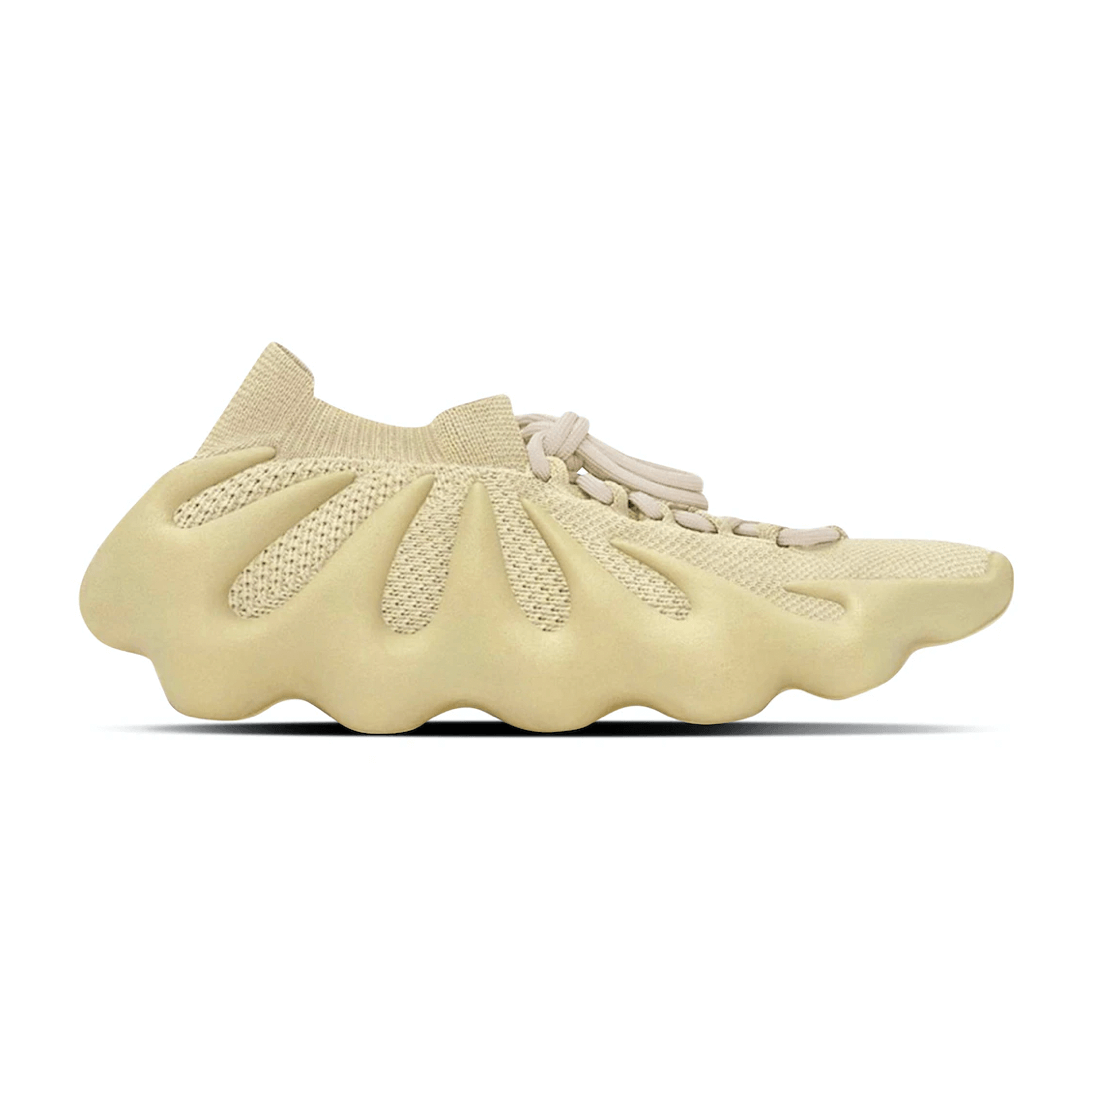 Adidas Yeezy 450 Sulfur by Yeezy from £123.00